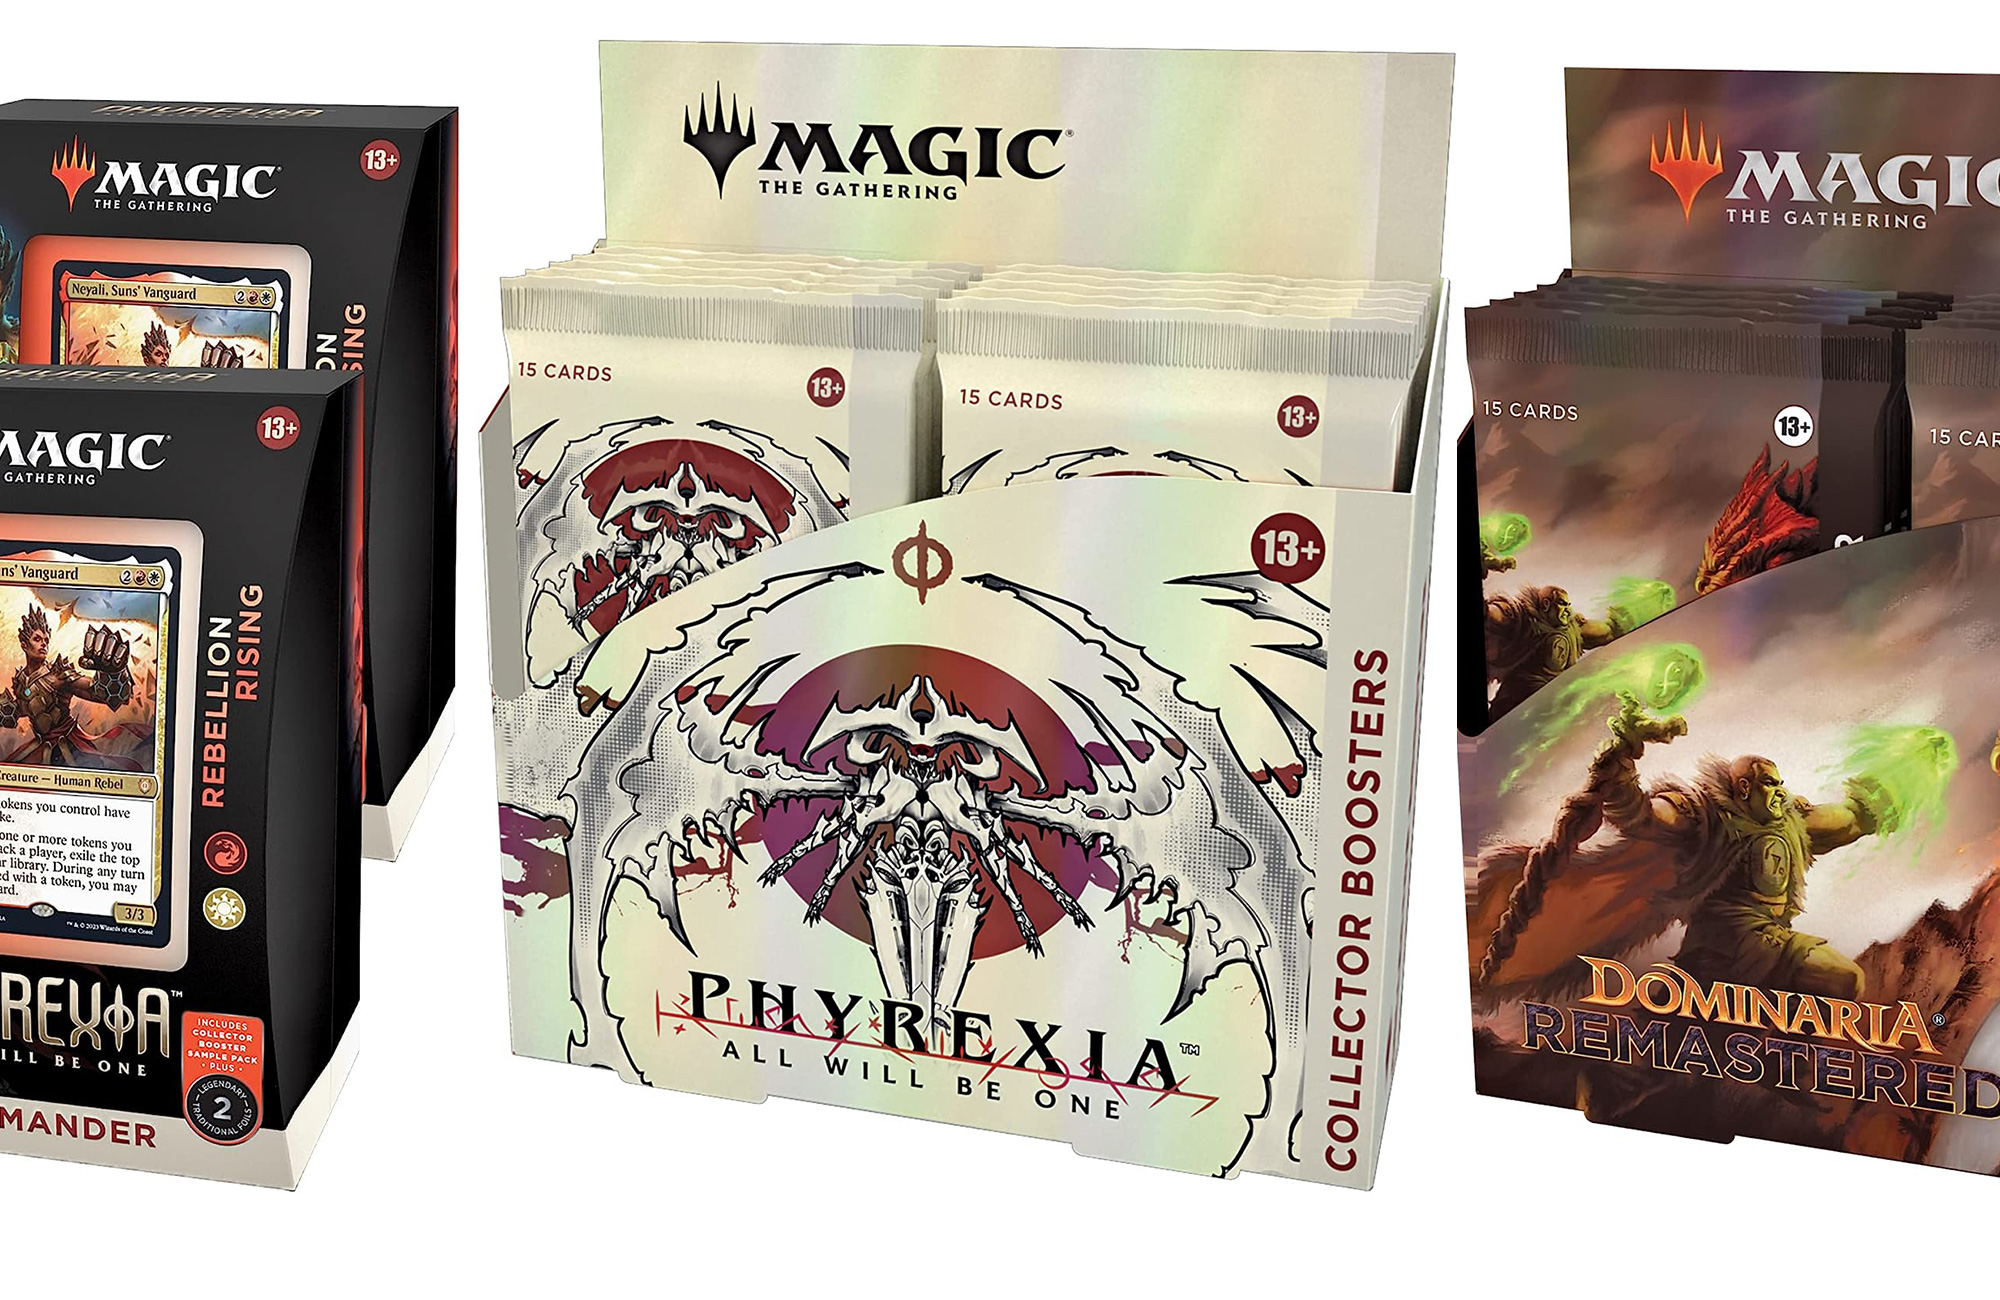 Amazon Prime Day 2023 offers rare Magic: The Gathering deals